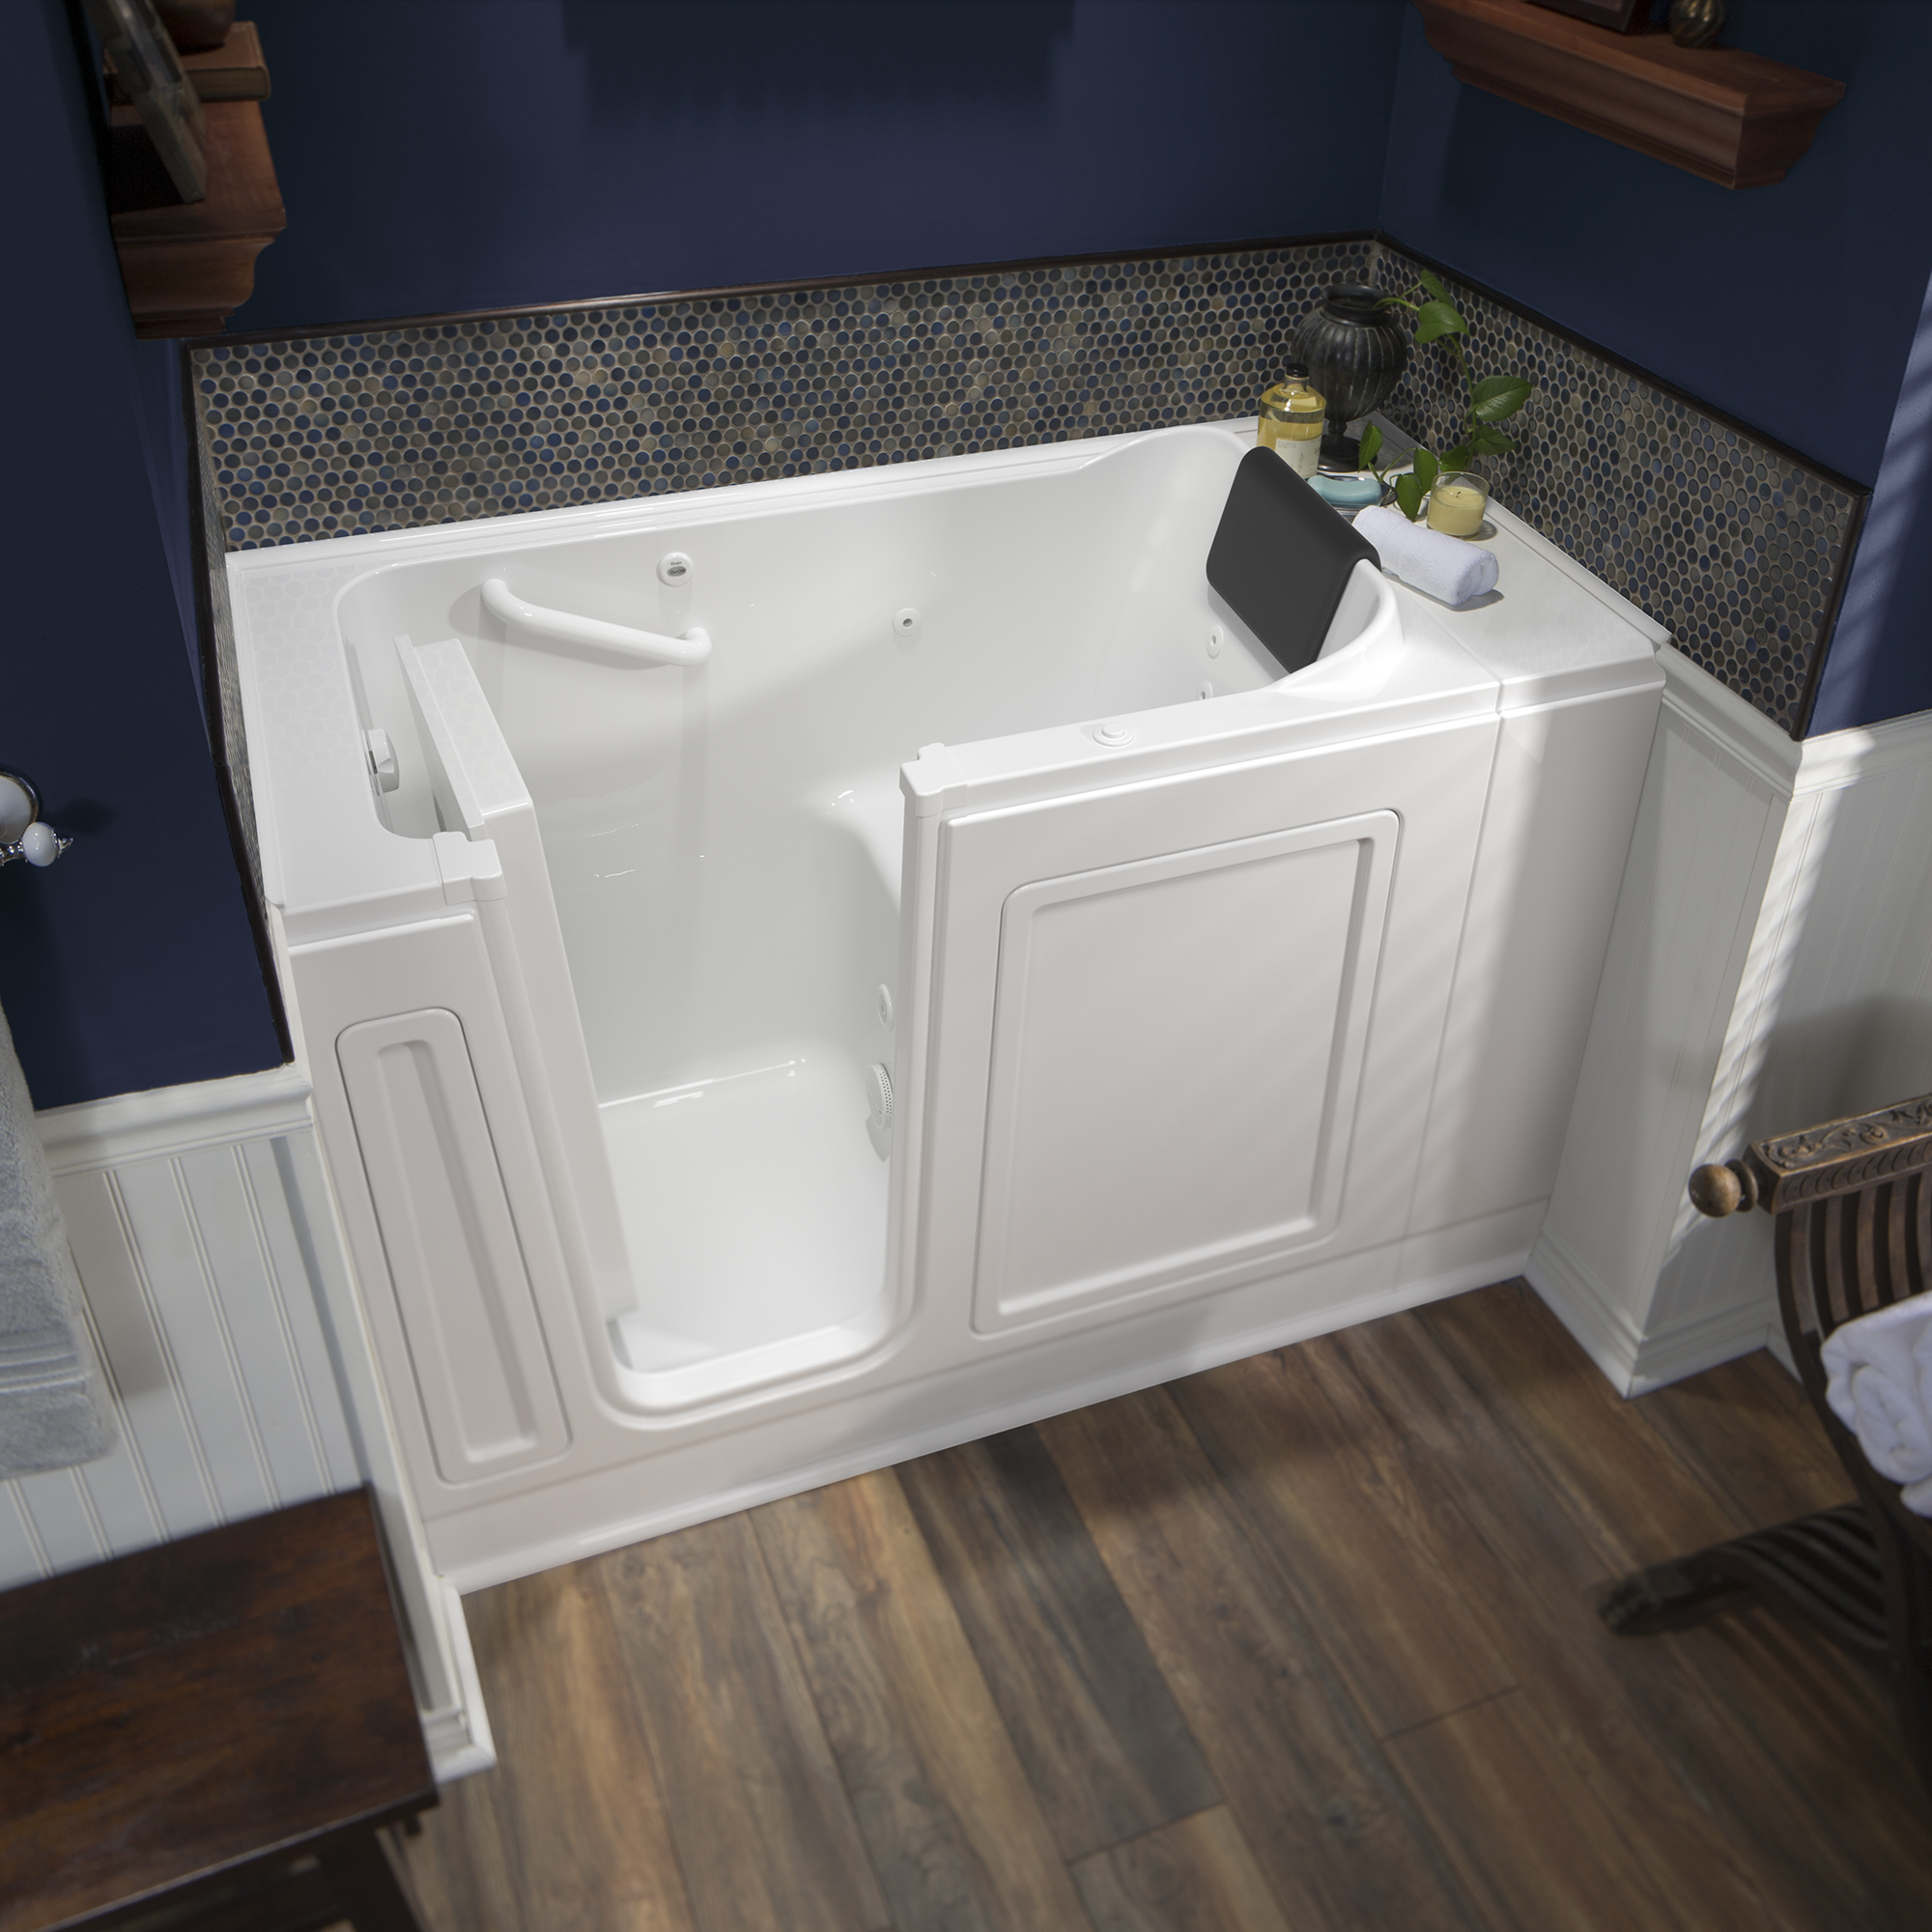 Acrylic Luxury Series 28 x 48-Inch Walk-in Tub With Whirlpool System - Left-Hand Drain